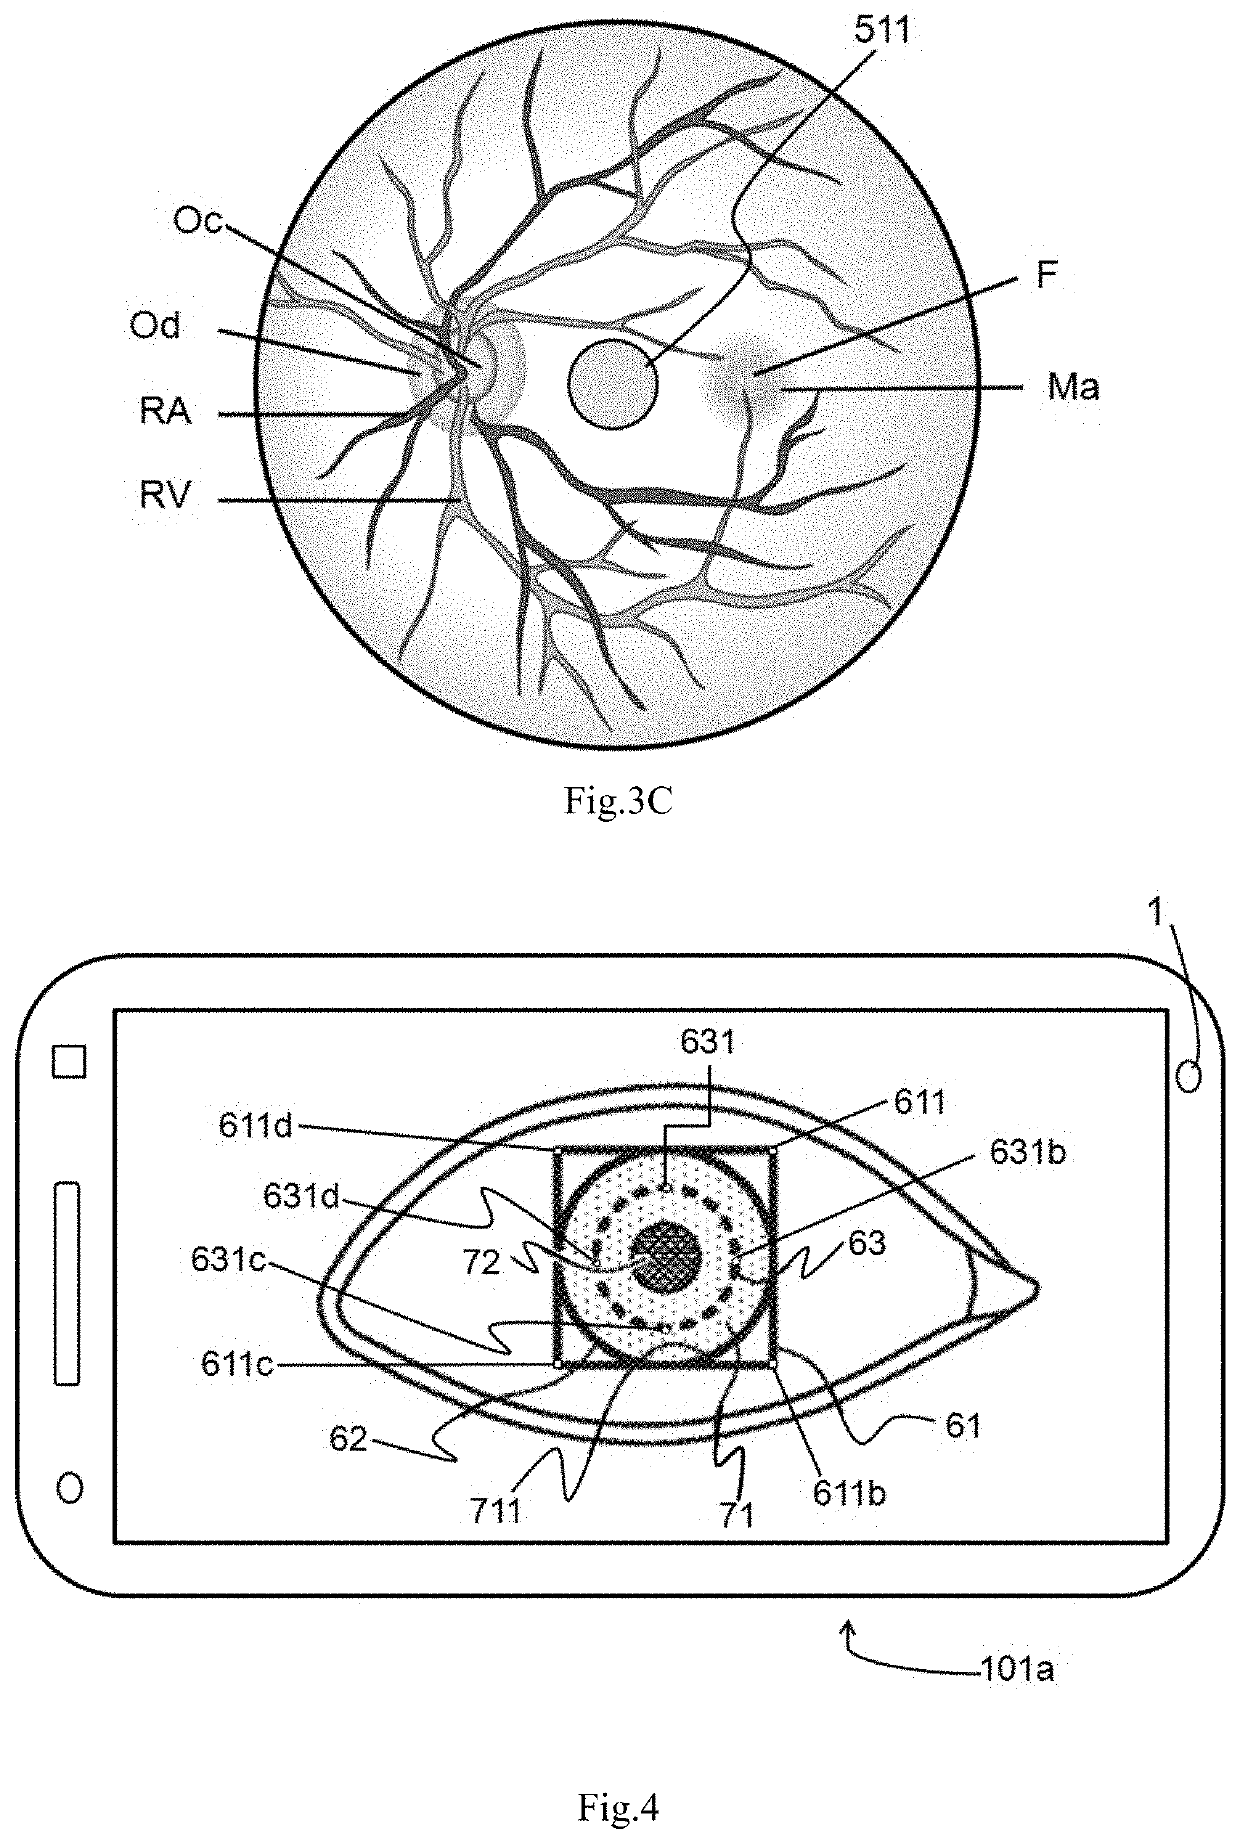 Method for standardized ophthalmic fundus imaging for the longitudinal monitoring of patients with eye diseases